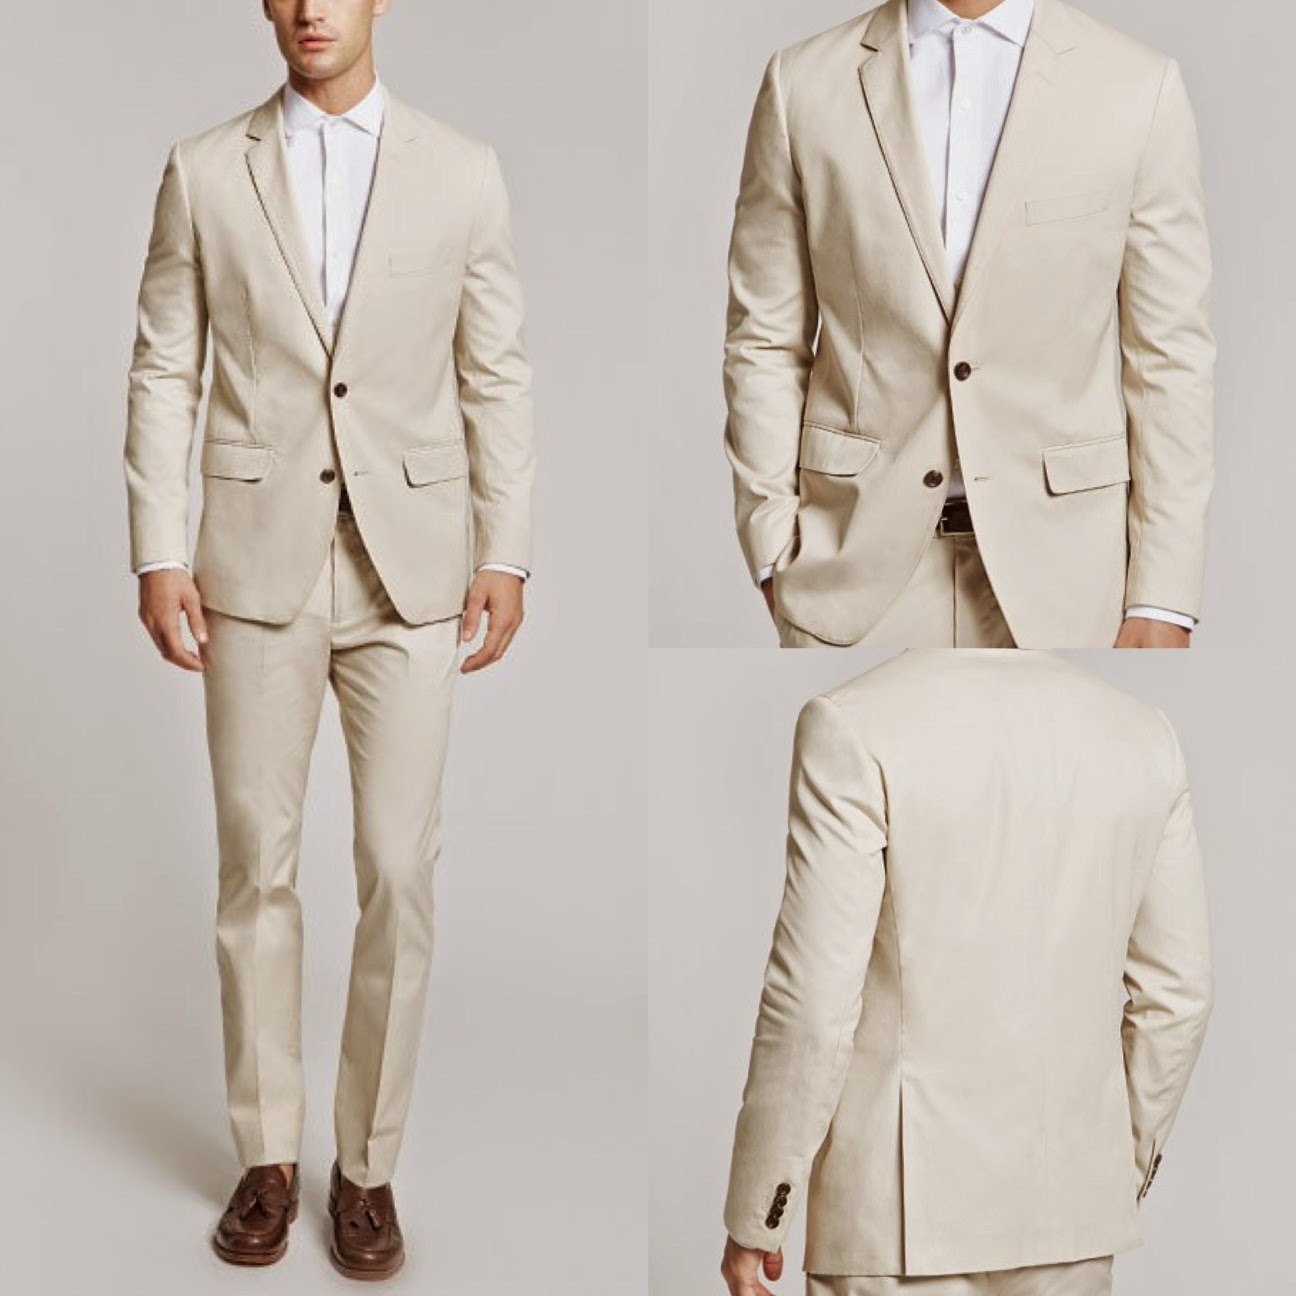 TONY LE CLUB KID: Bonobos Fall 2014 Suit and Tuxedo Collection